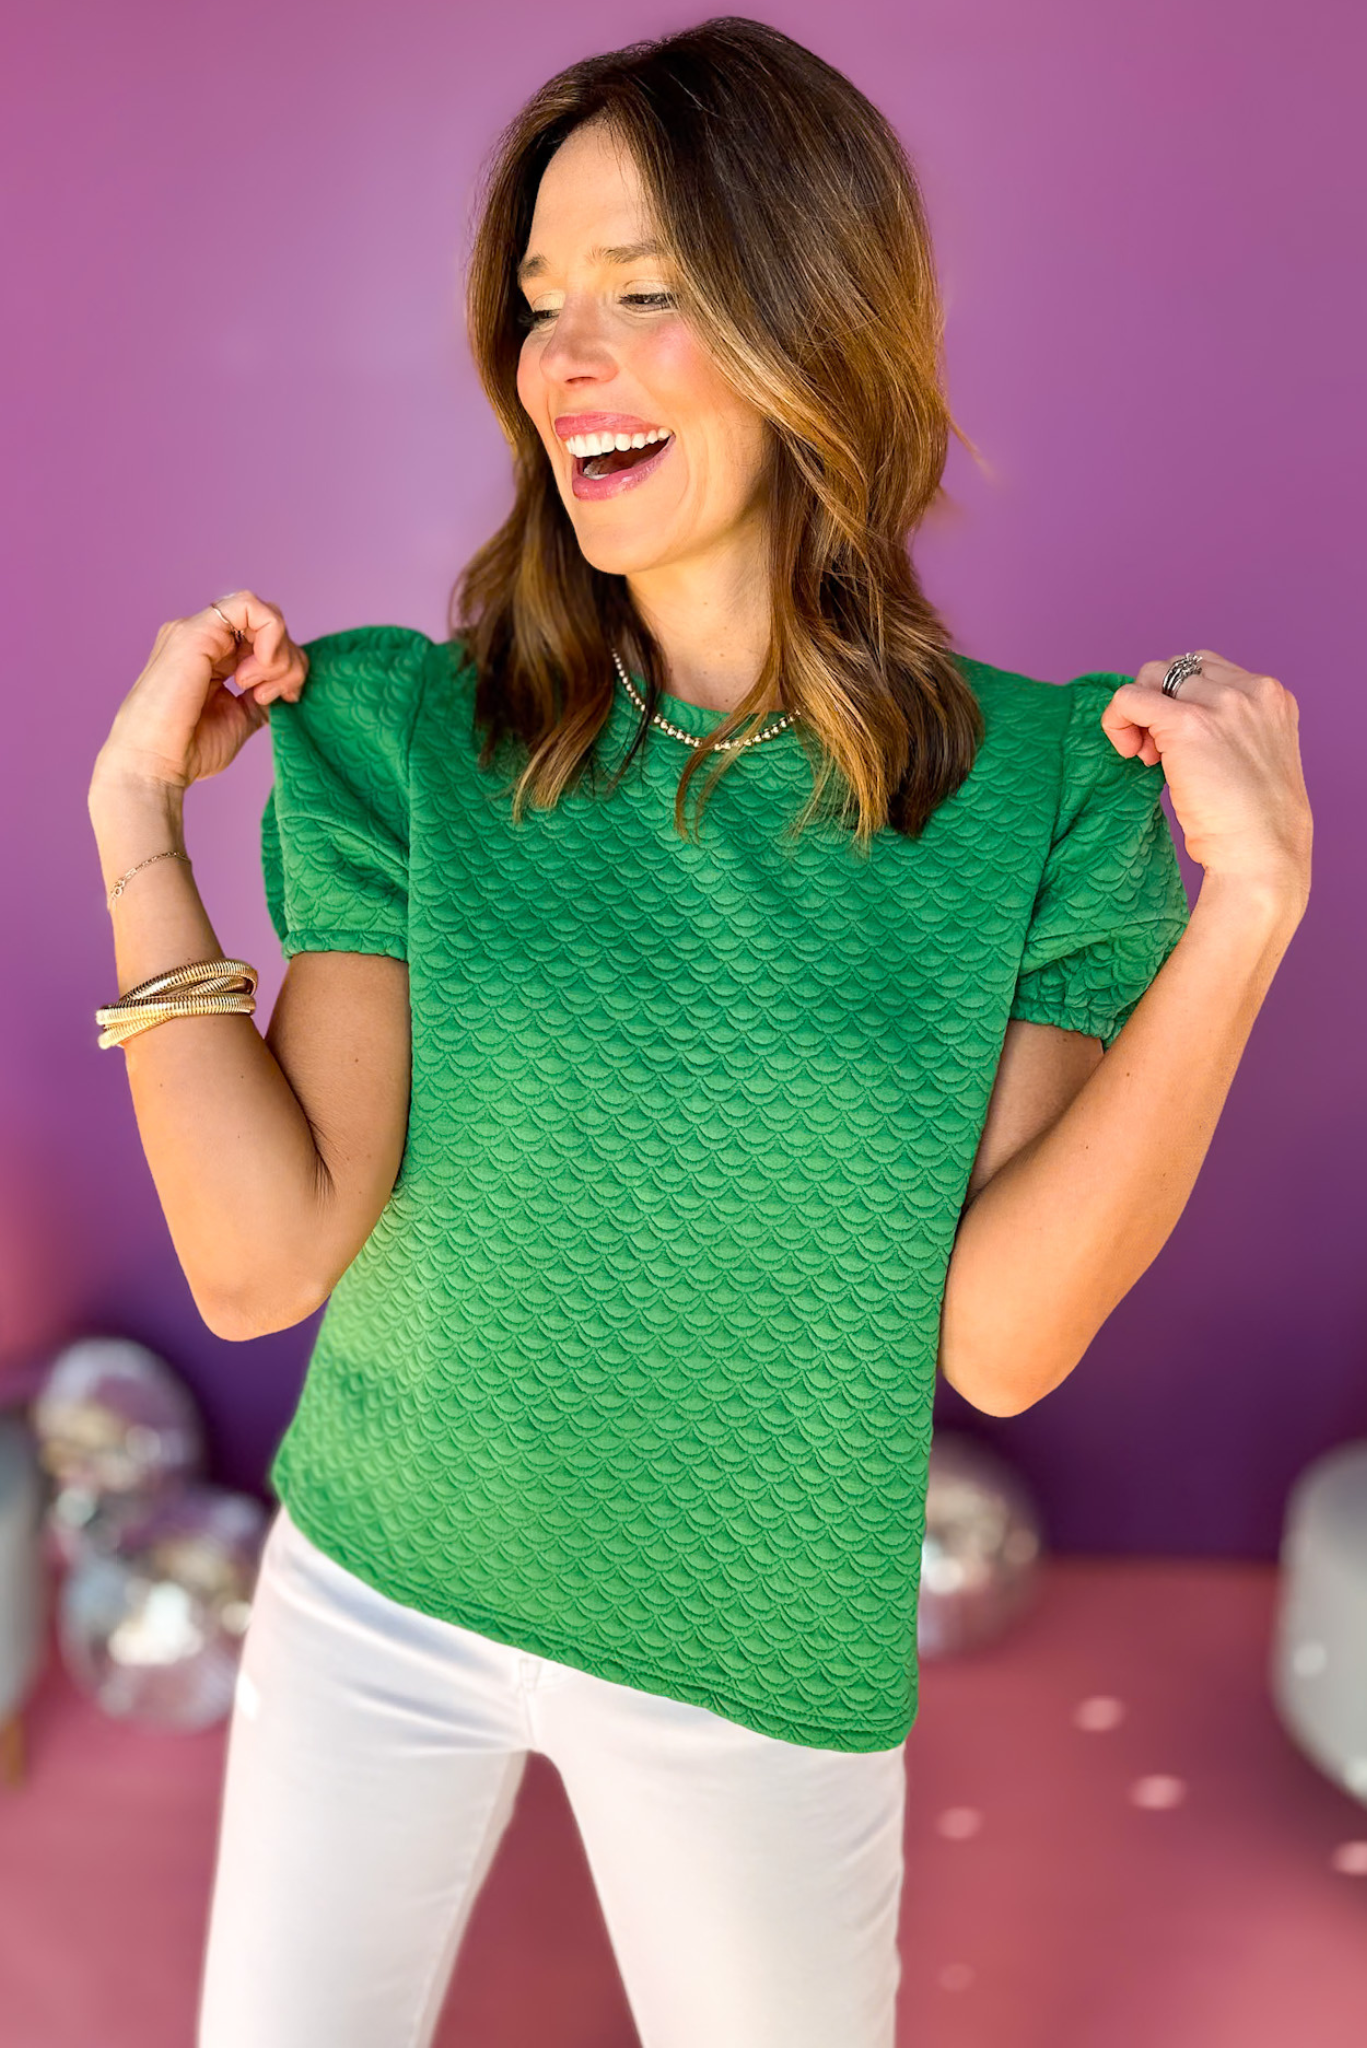 SSYS The Riley Top In Textured Green, ssys the label, elevated top, spring top, spring fashion, textured top, everyday top, must have top, mom style, elevated style, shop style your senses by mallory fitzsimmons, ssys by mallory fitzsimmons